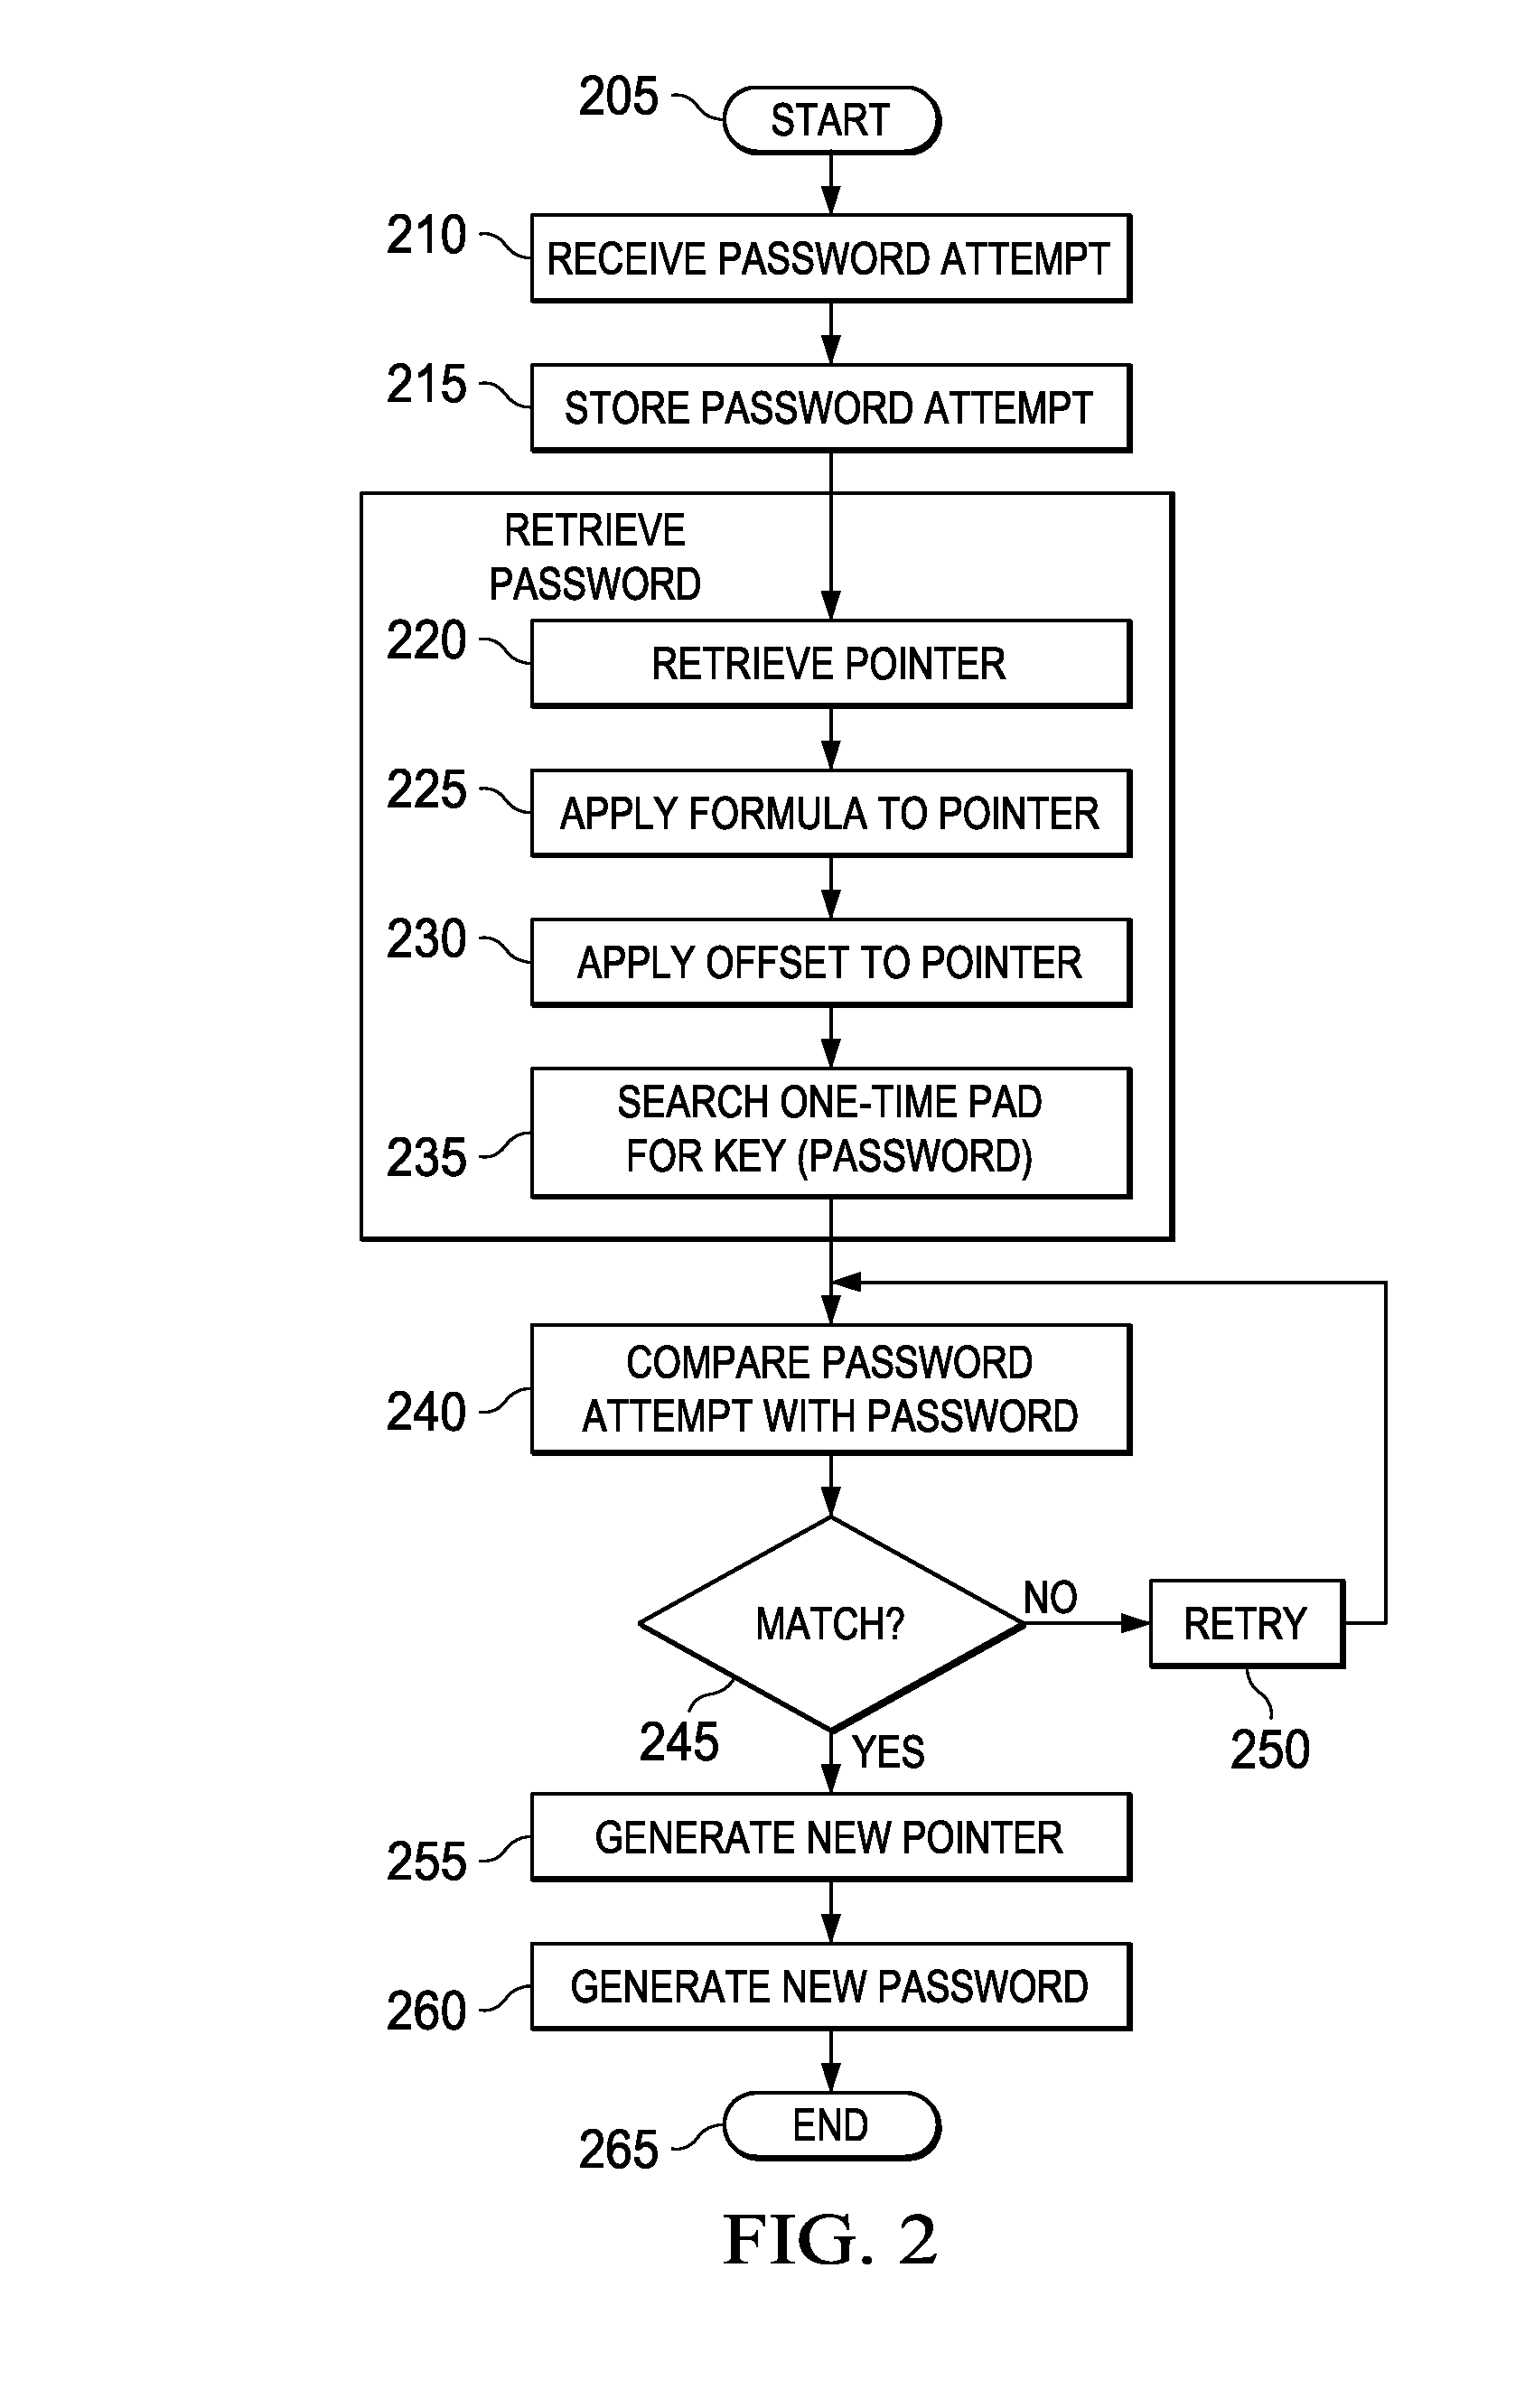 Systems and methods for information security using one-time pad